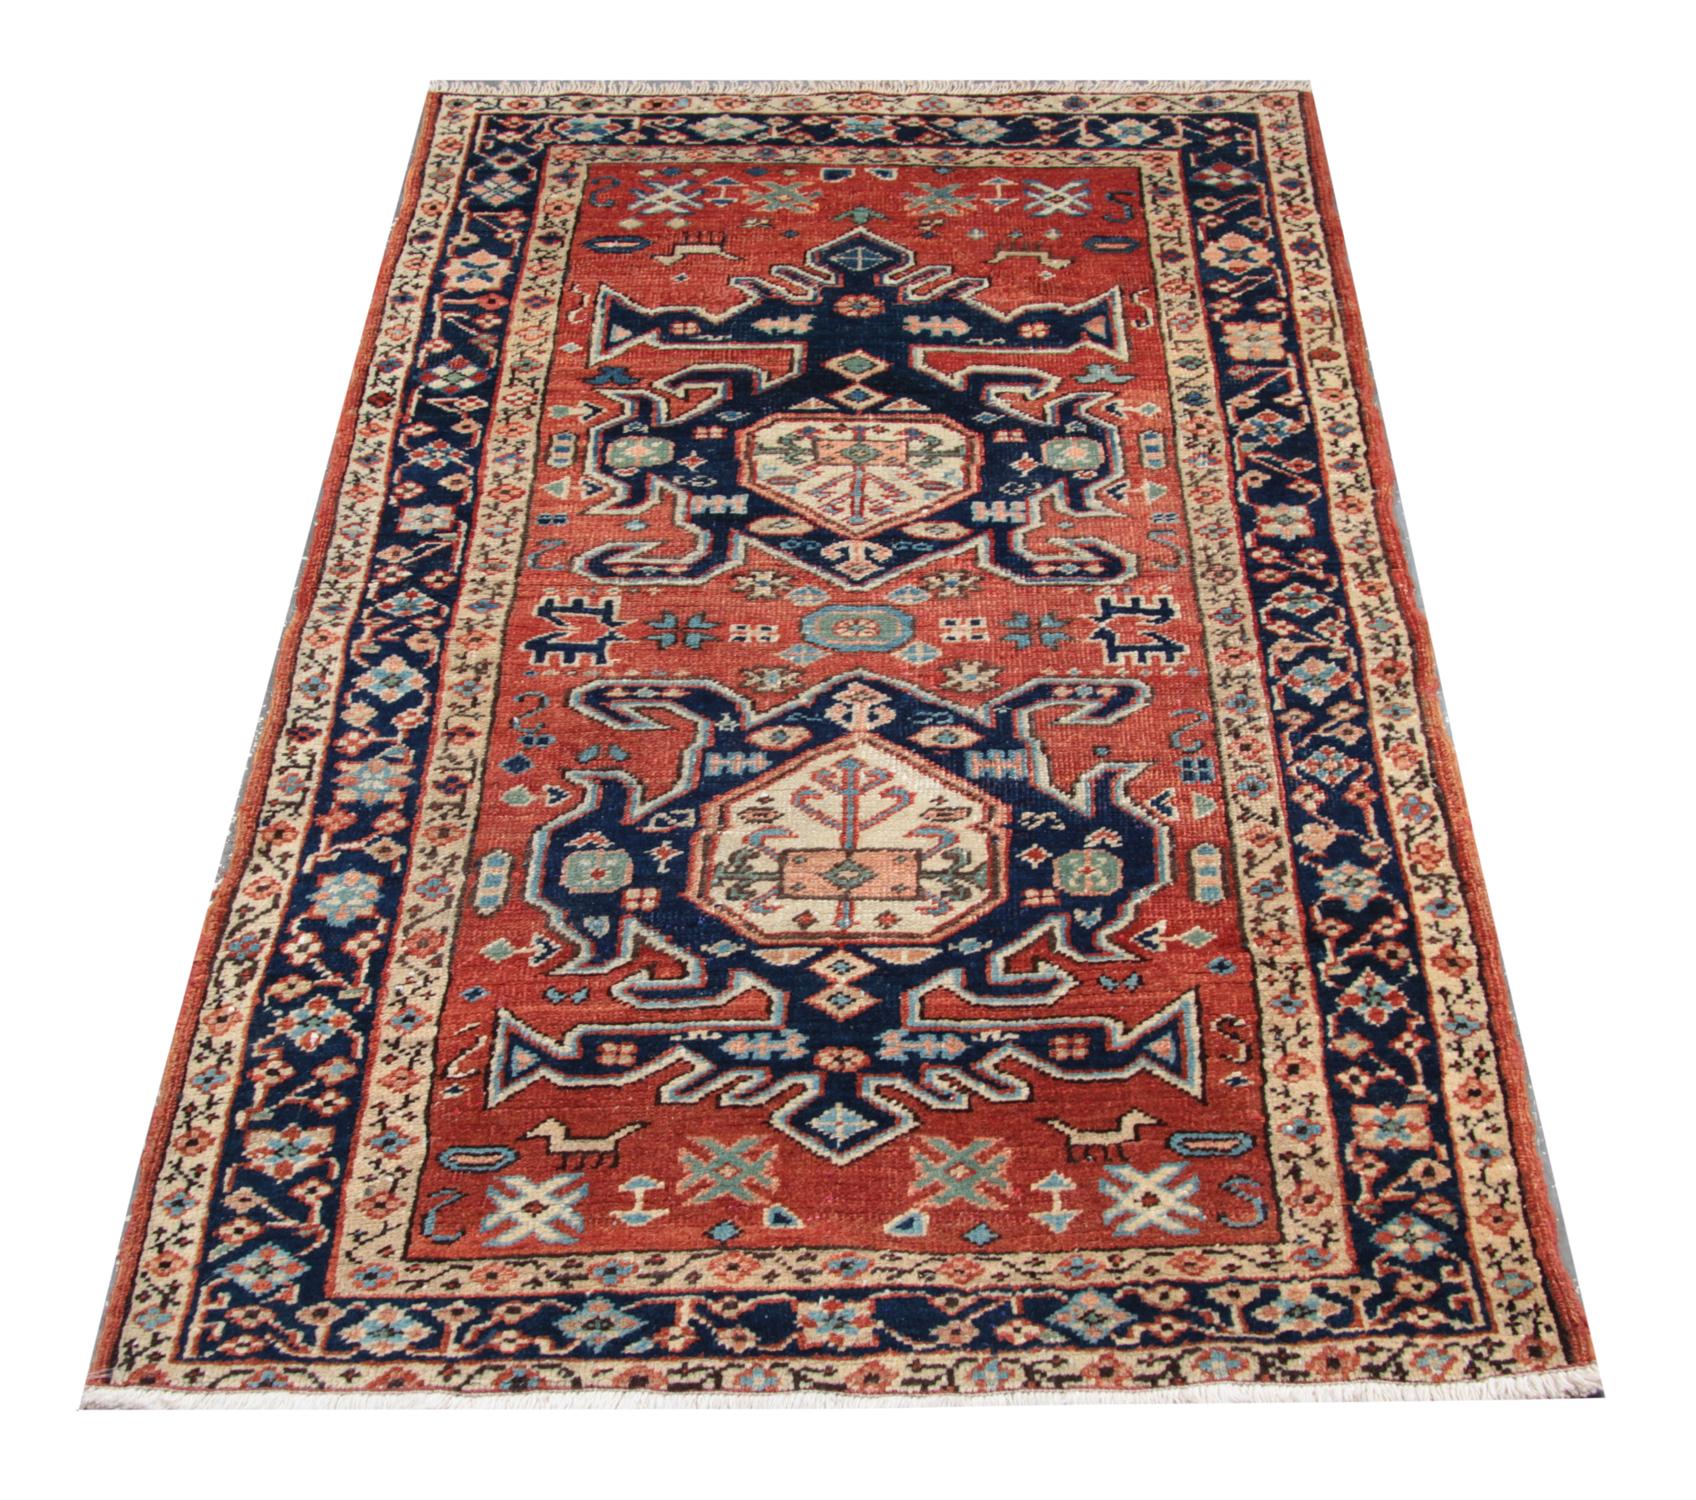 This piece is a Caucasian Antique Carpet featuring an orange central field adorned with two detailed central medallions woven symmetrically in accents of blue cream, orange and green. Intricate motifs and animal designs have been woven in the